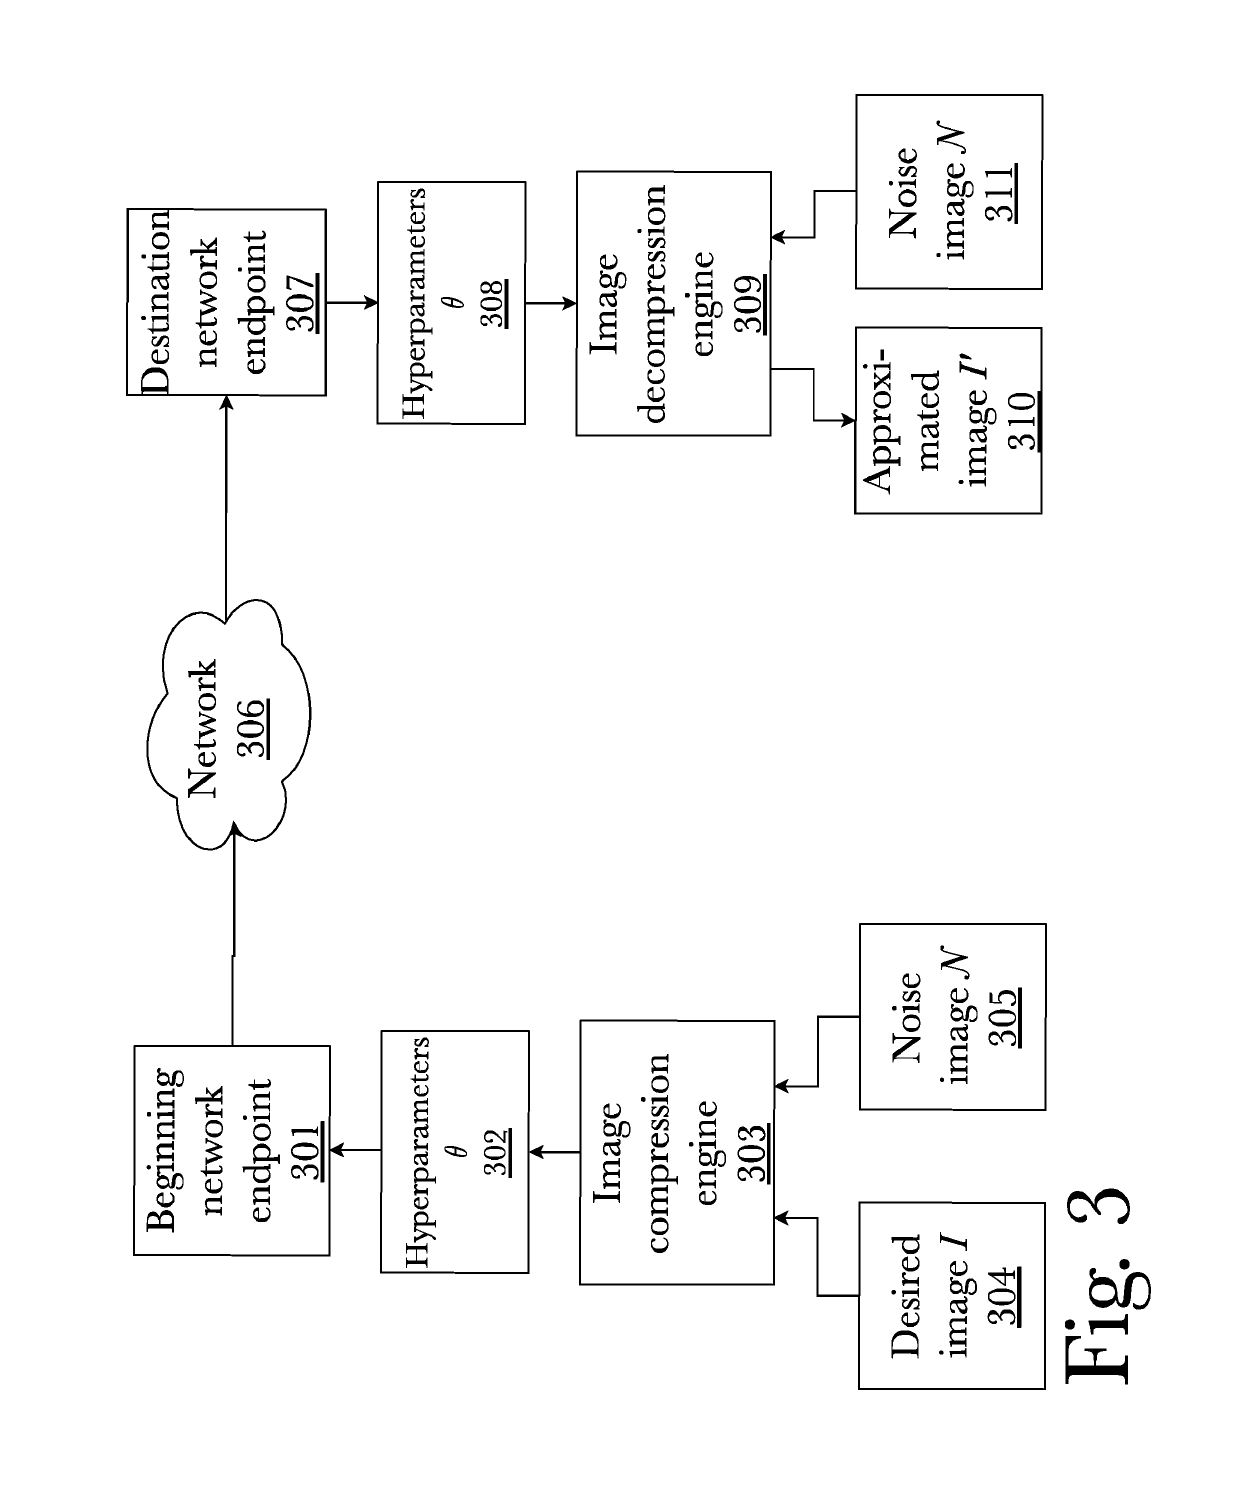 System and method for lossy image and video compression and transmission utilizing neural networks